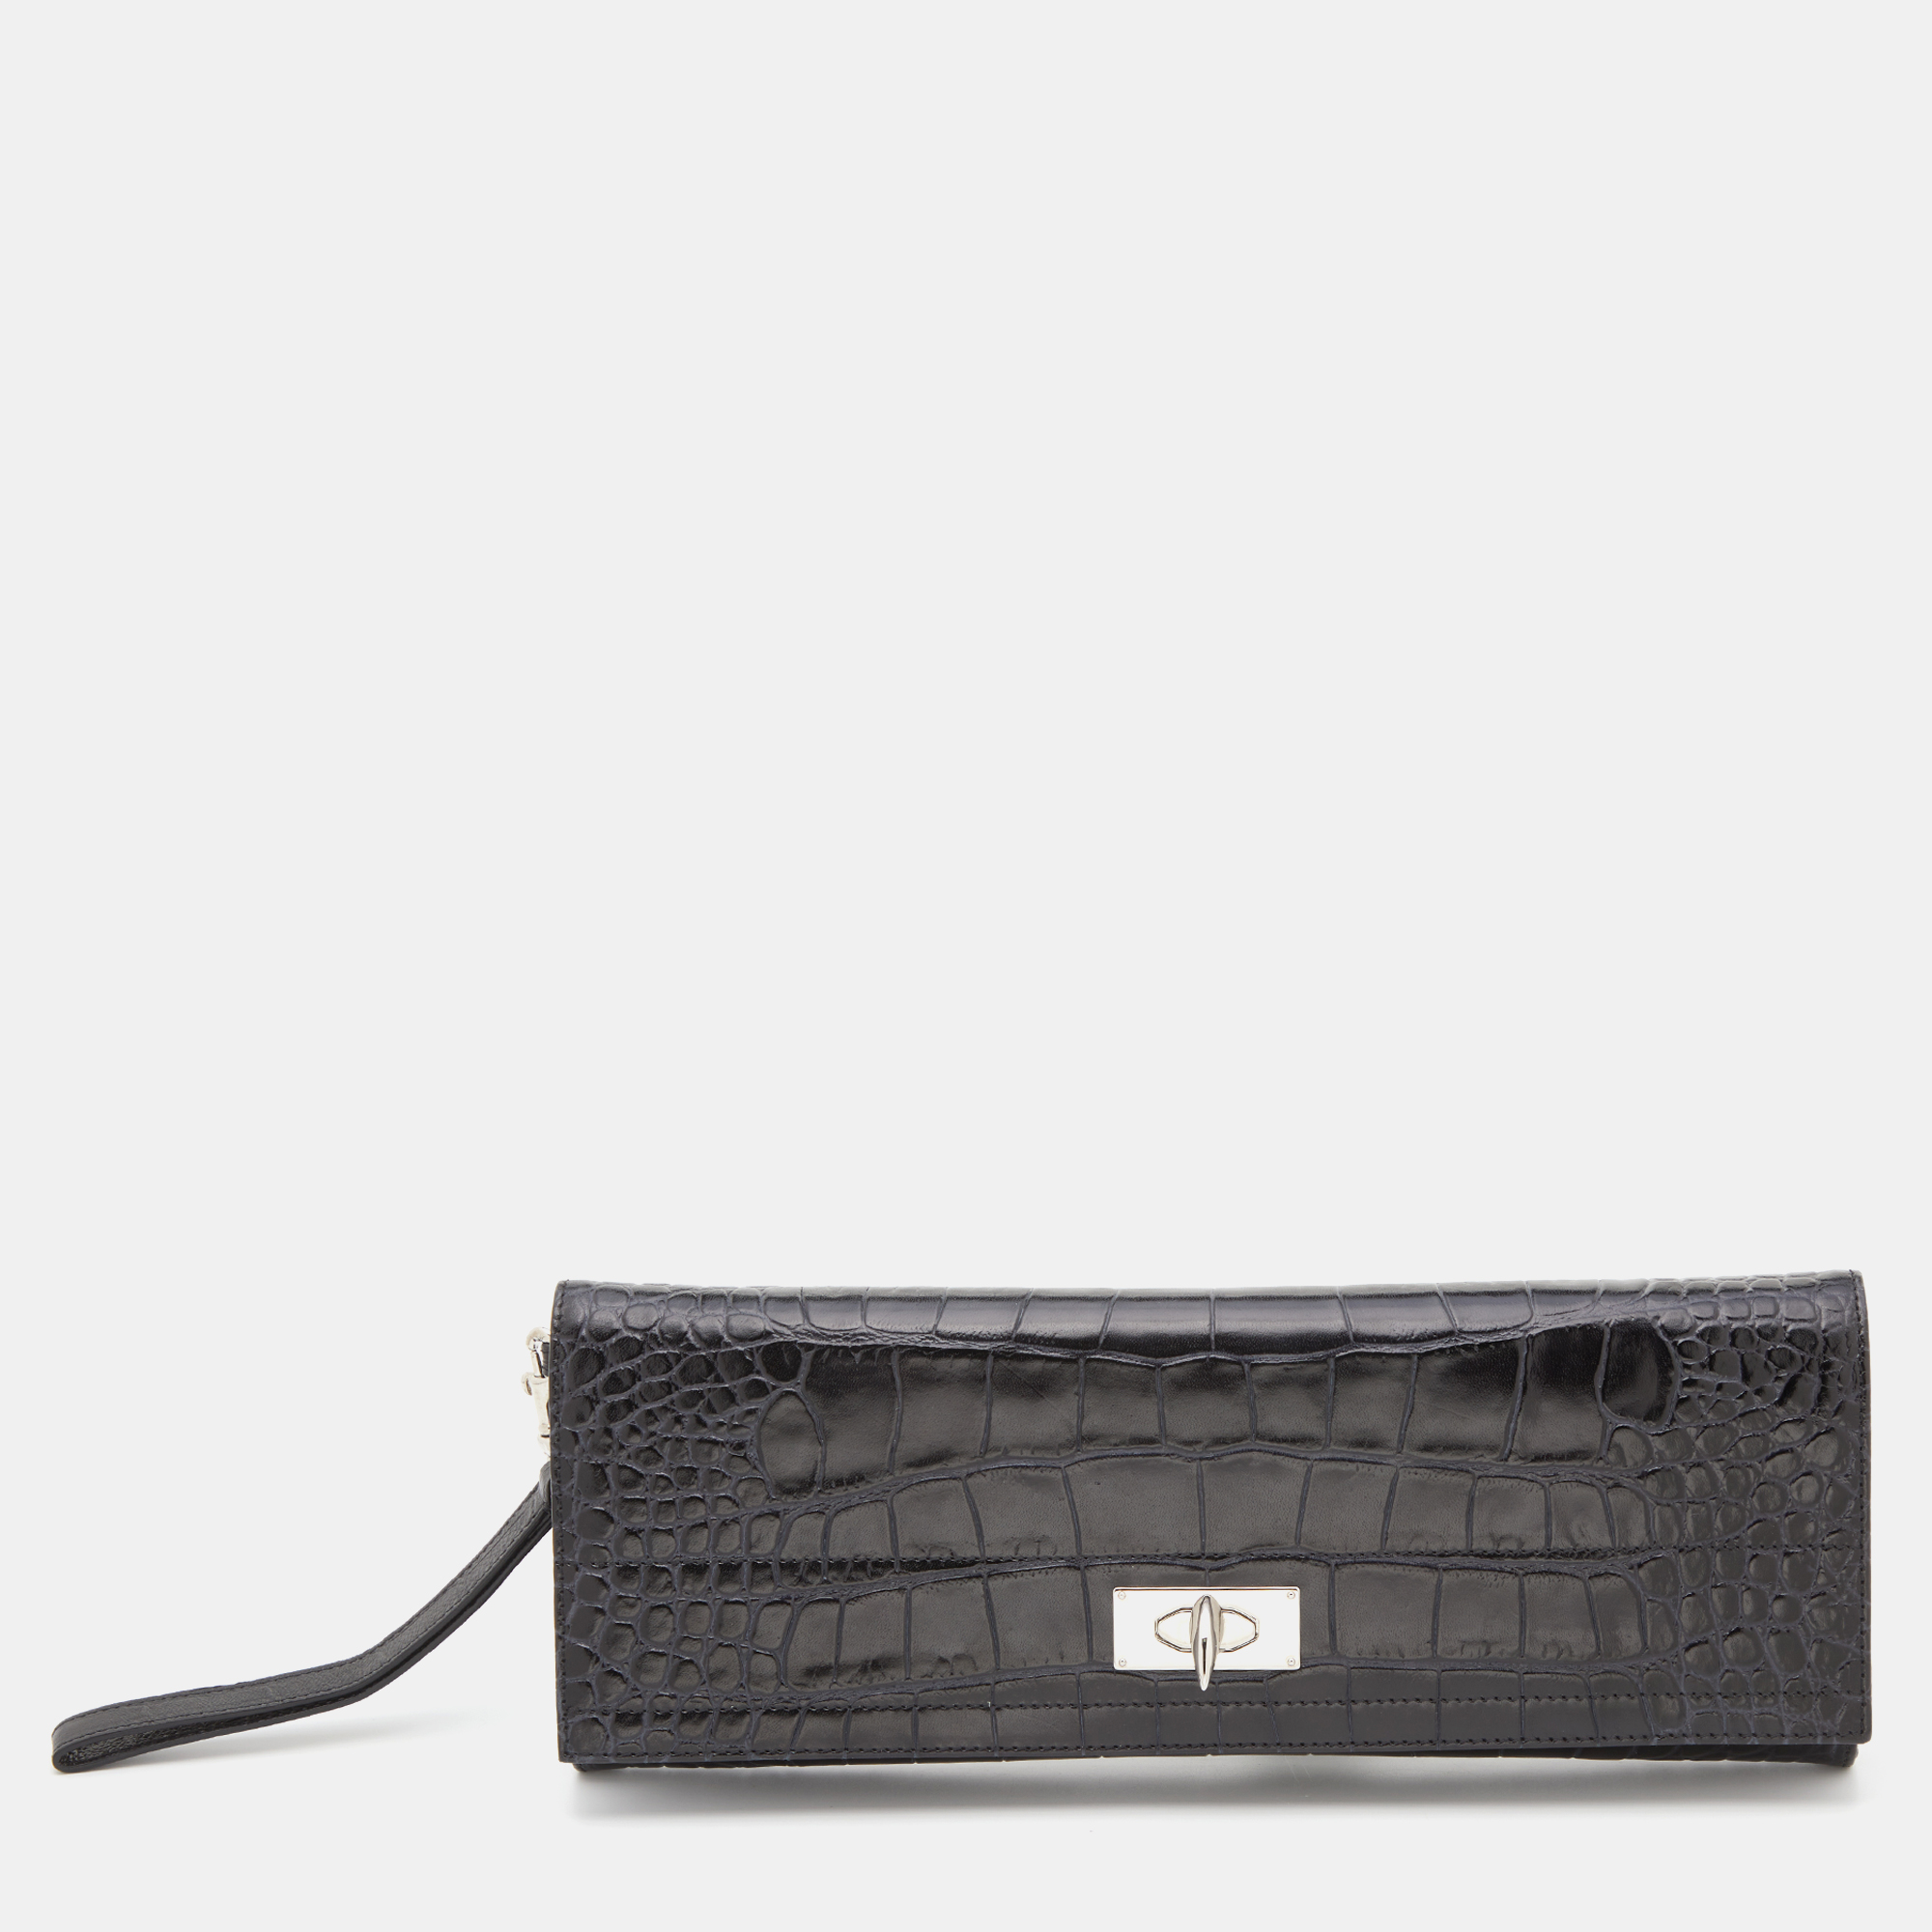 Pre-owned Givenchy Black Croc Embossed Leather Shark Tooth Long Wristlet Clutch